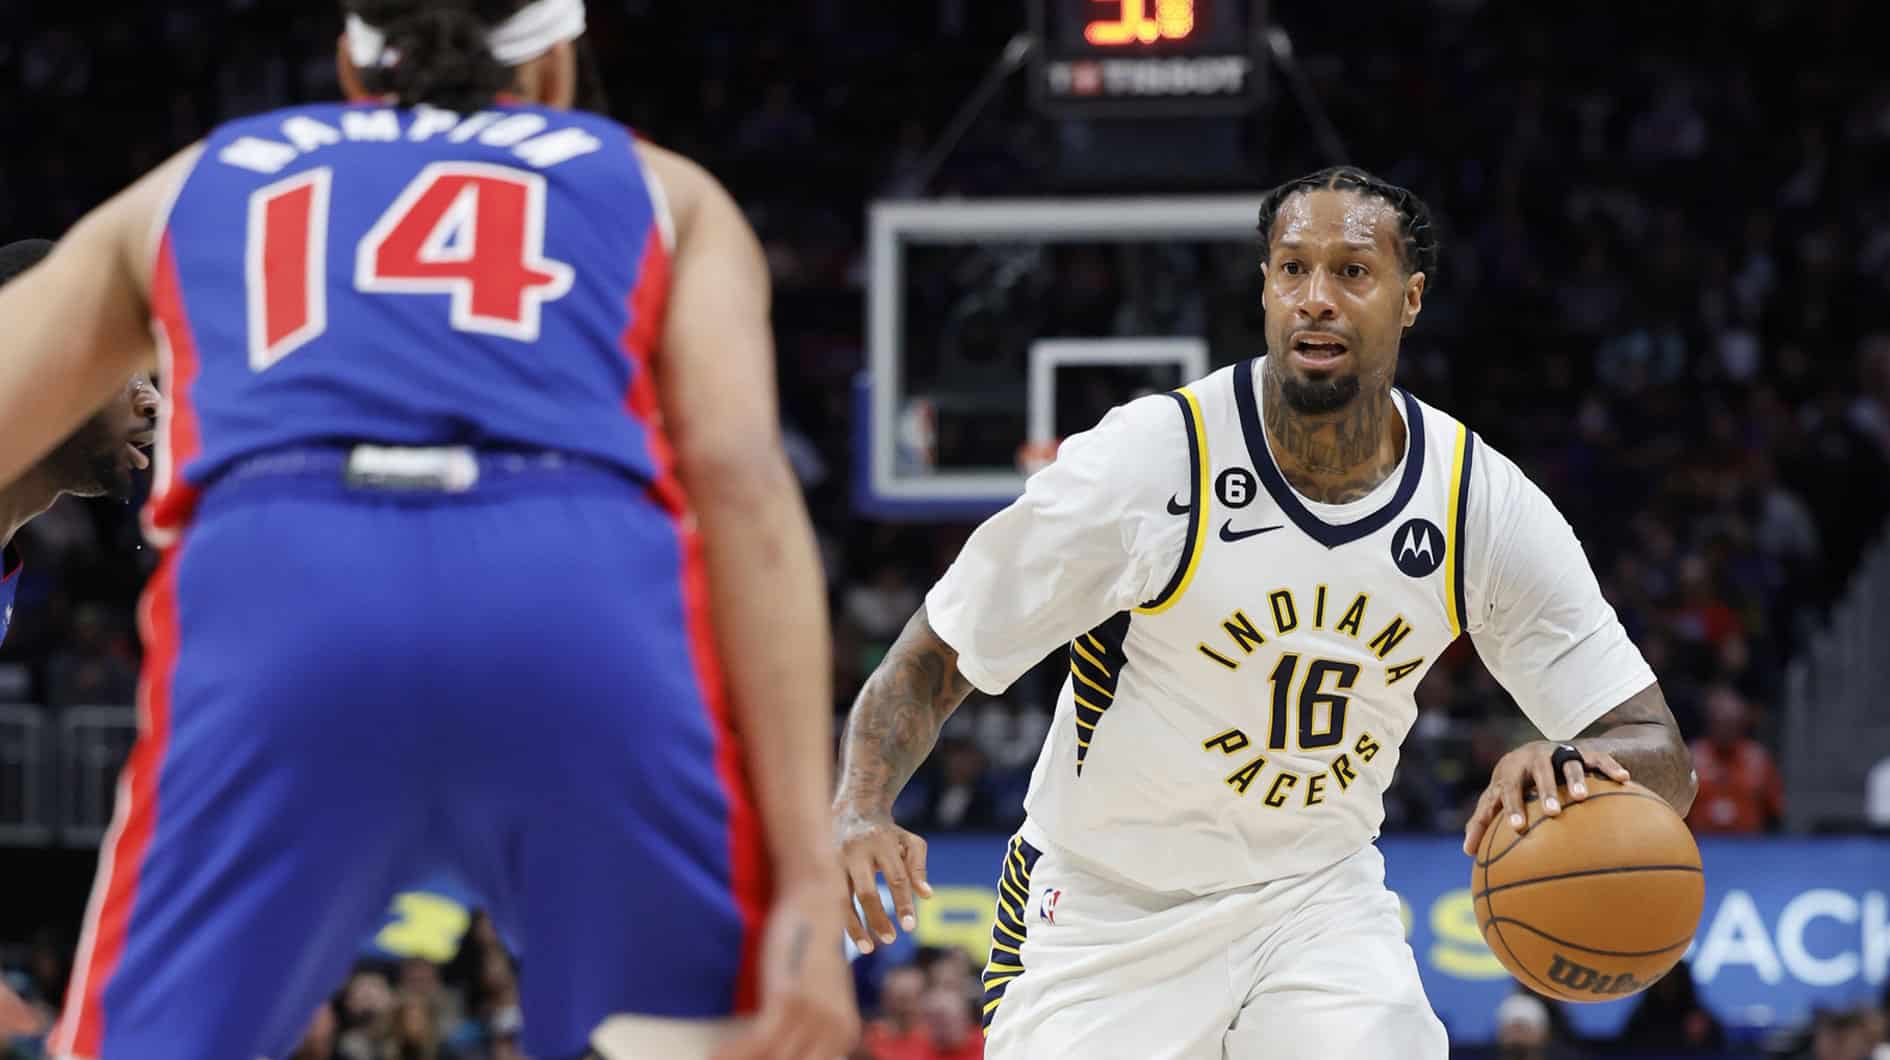 Indiana Pacers forward James Johnson (16) dribbles the ball against Detroit Pistons guard R.J. Hampton (14) in the second half at Little Caesars Arena. 